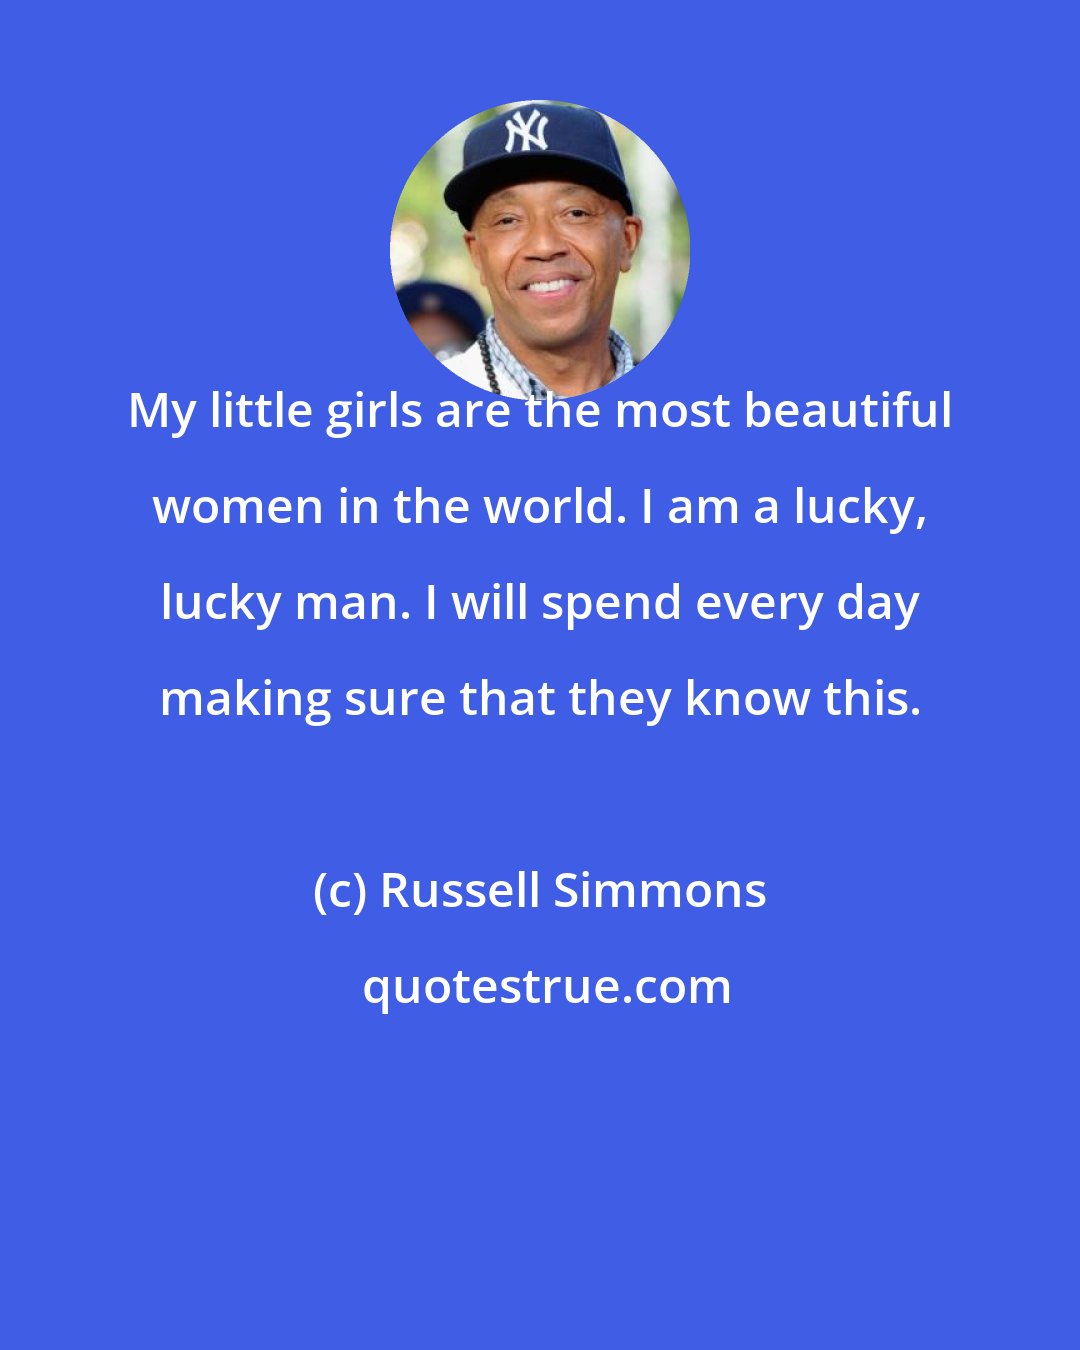 Russell Simmons: My little girls are the most beautiful women in the world. I am a lucky, lucky man. I will spend every day making sure that they know this.